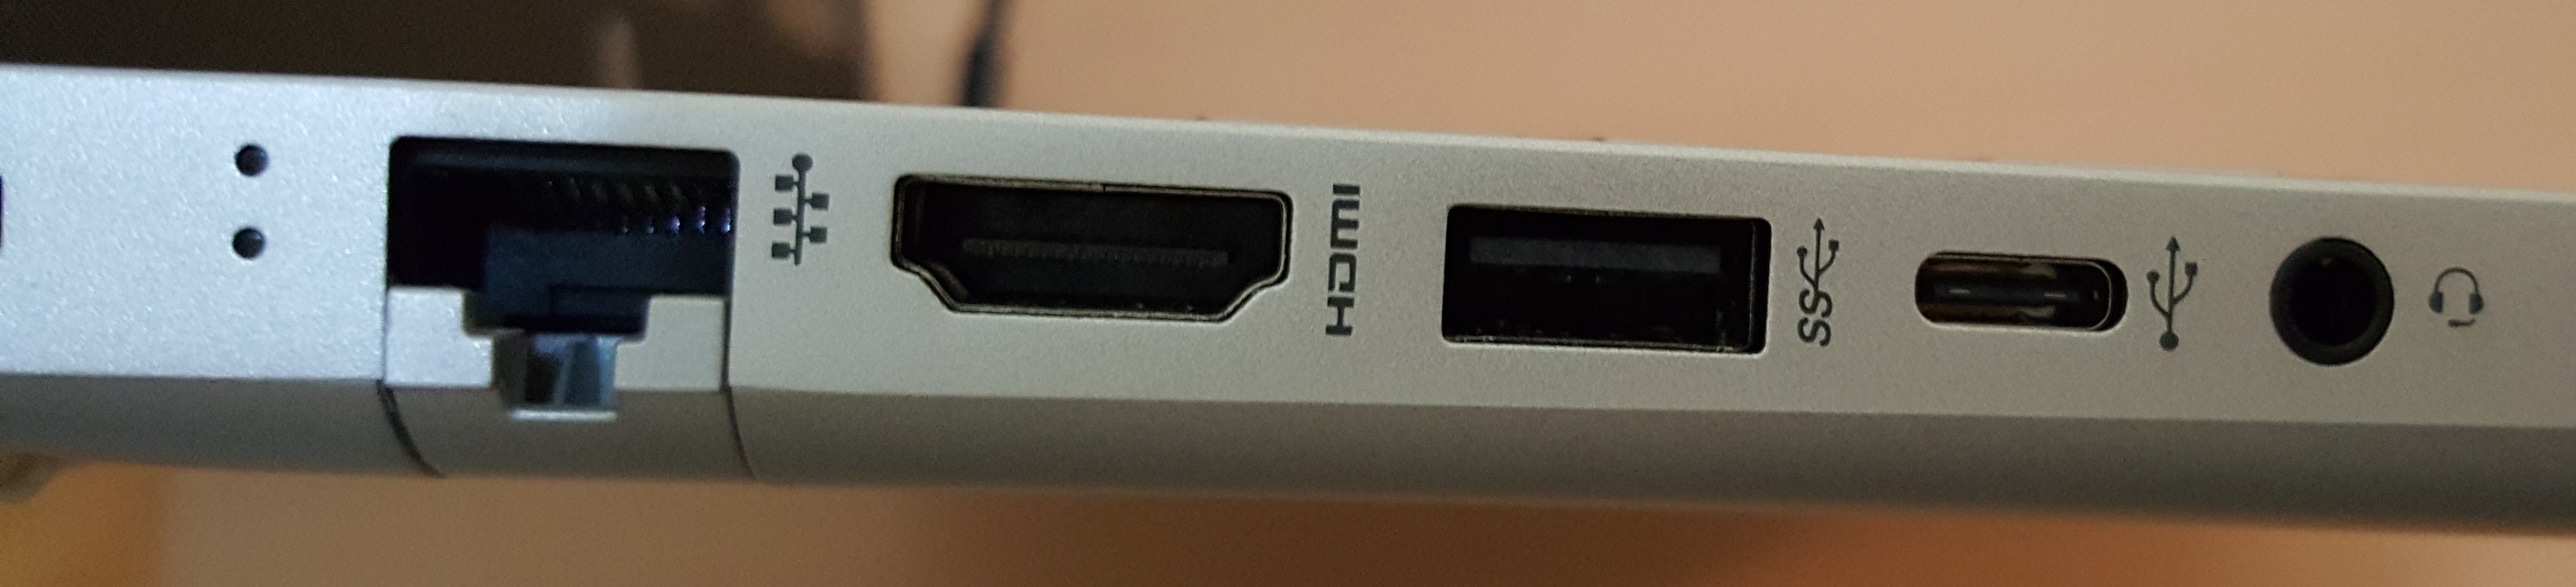 PowerShare on USB-3.1 and USB-C ports - HP Support Community - 6508763